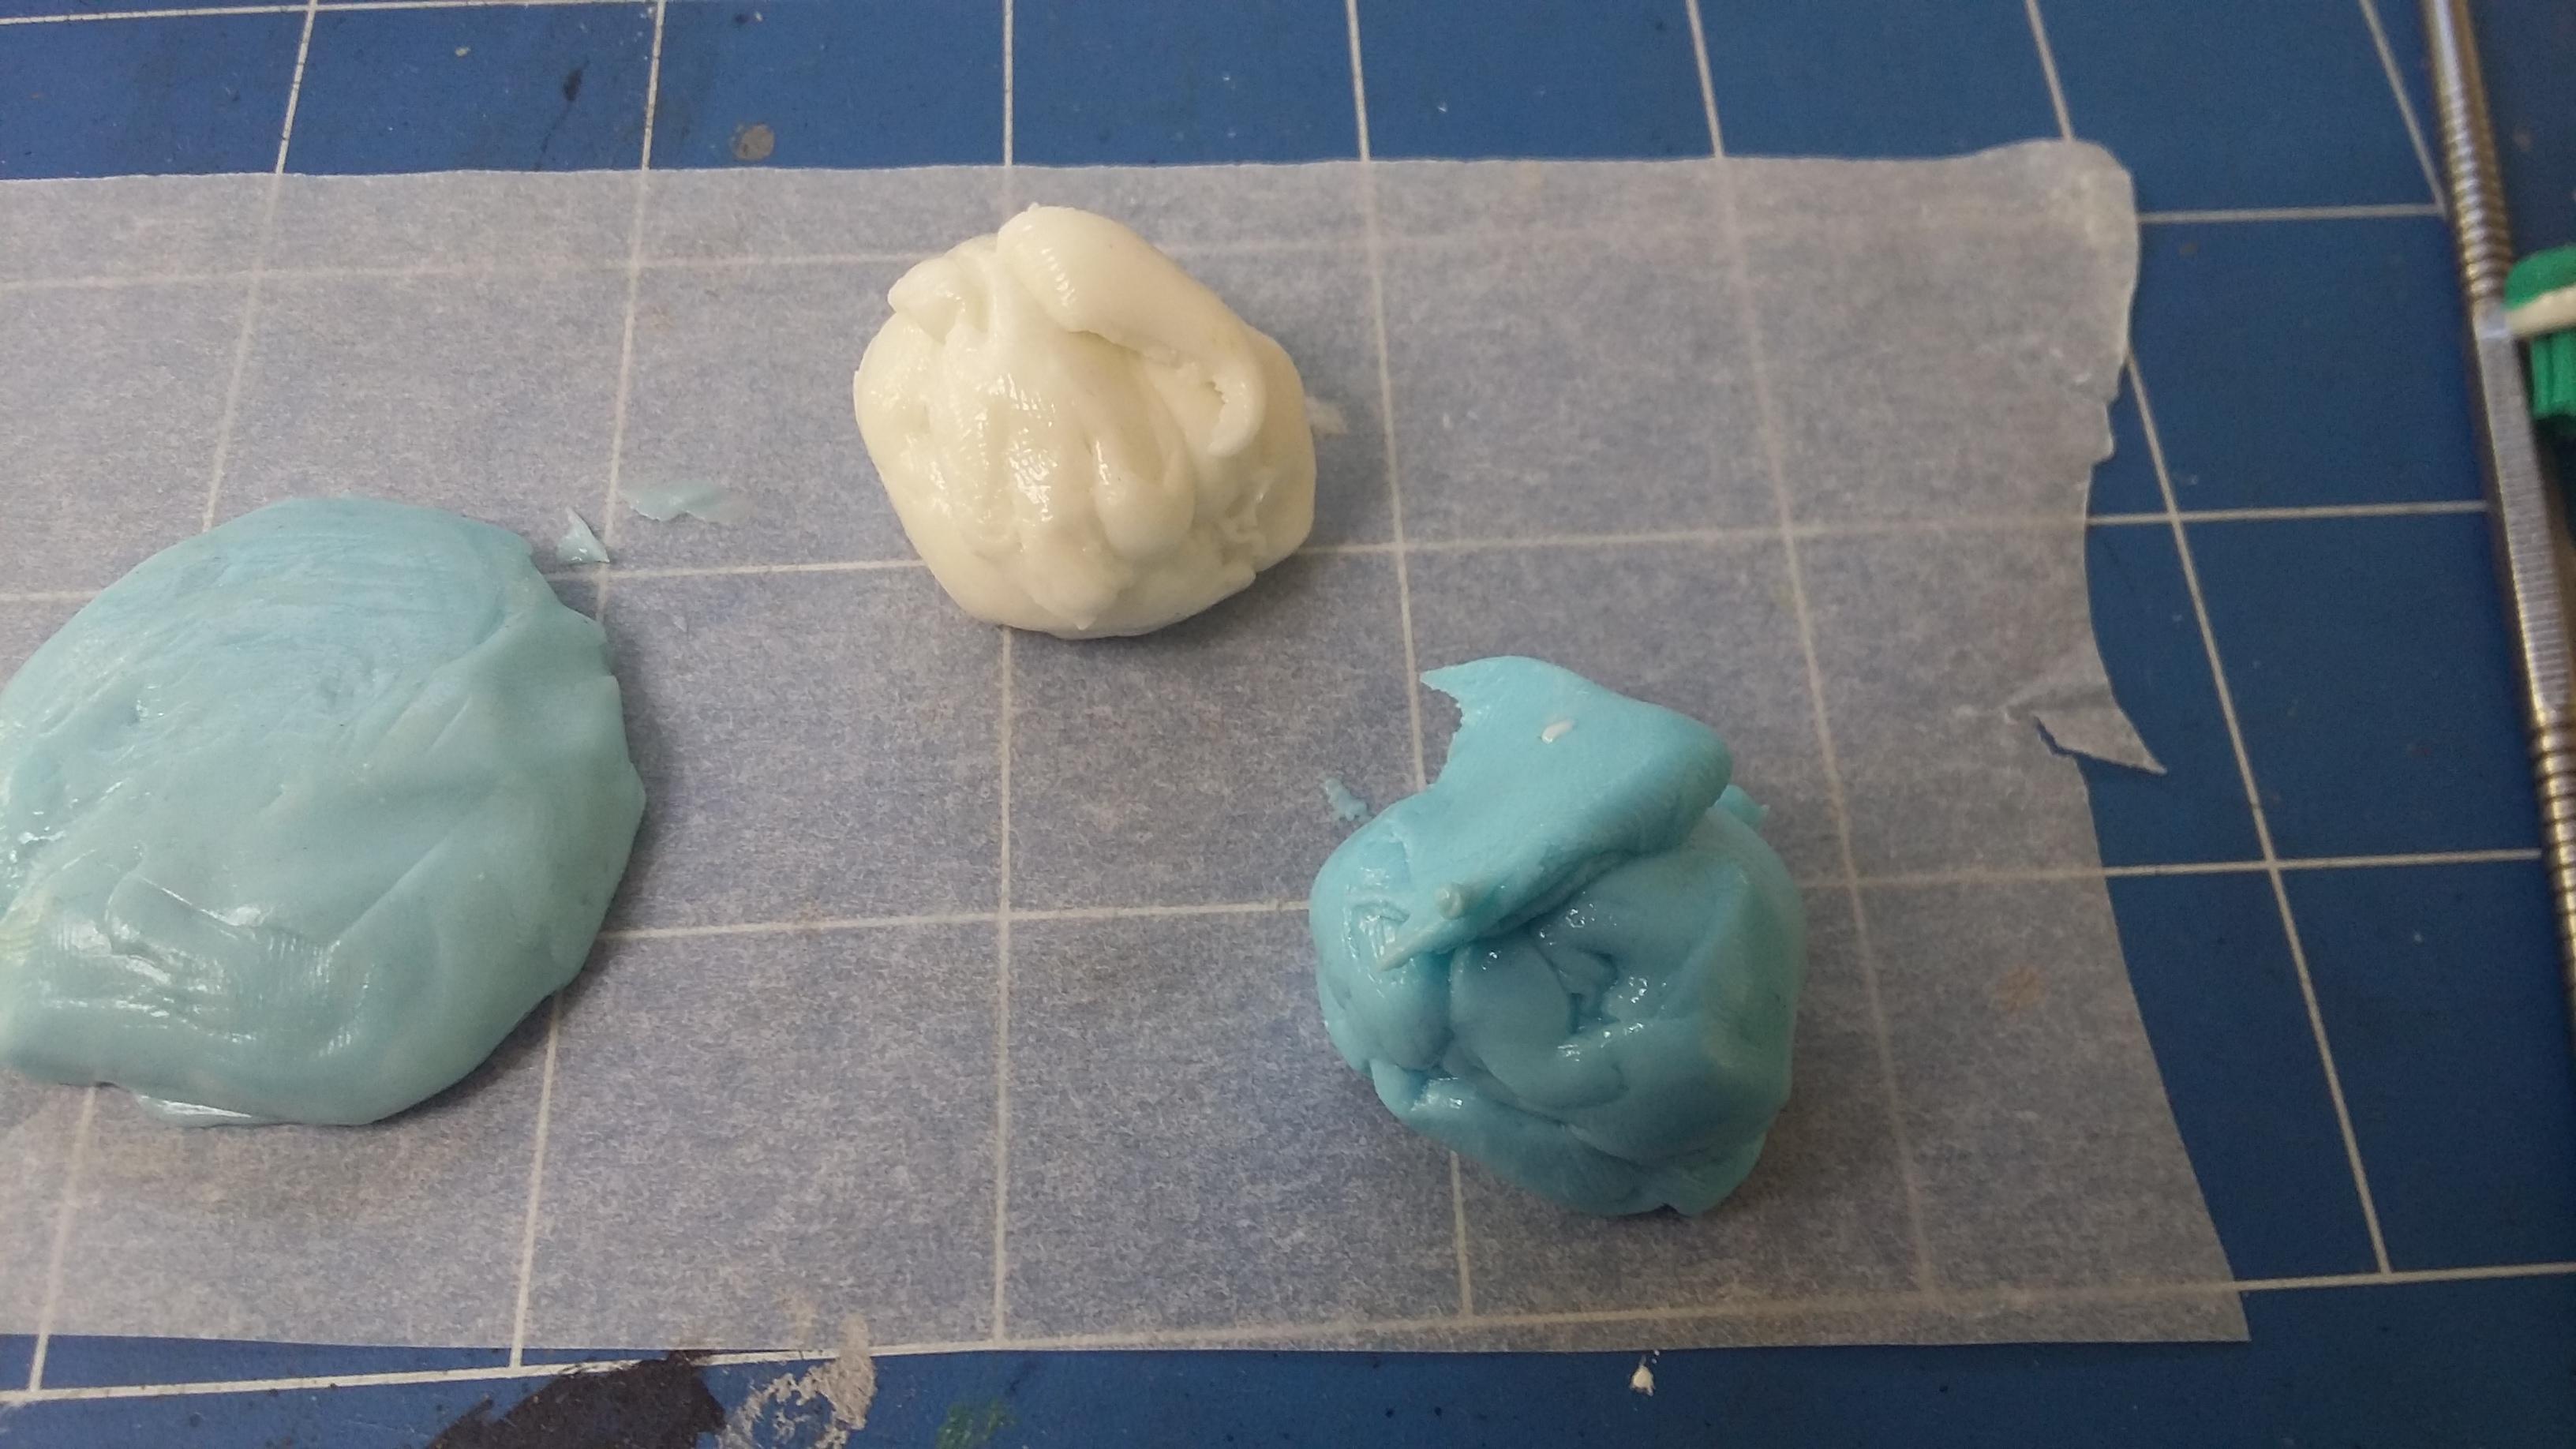 Acrylic, Casting, Greenstuff, Mould, Part, Putty, Resin, Silicone, Two, World